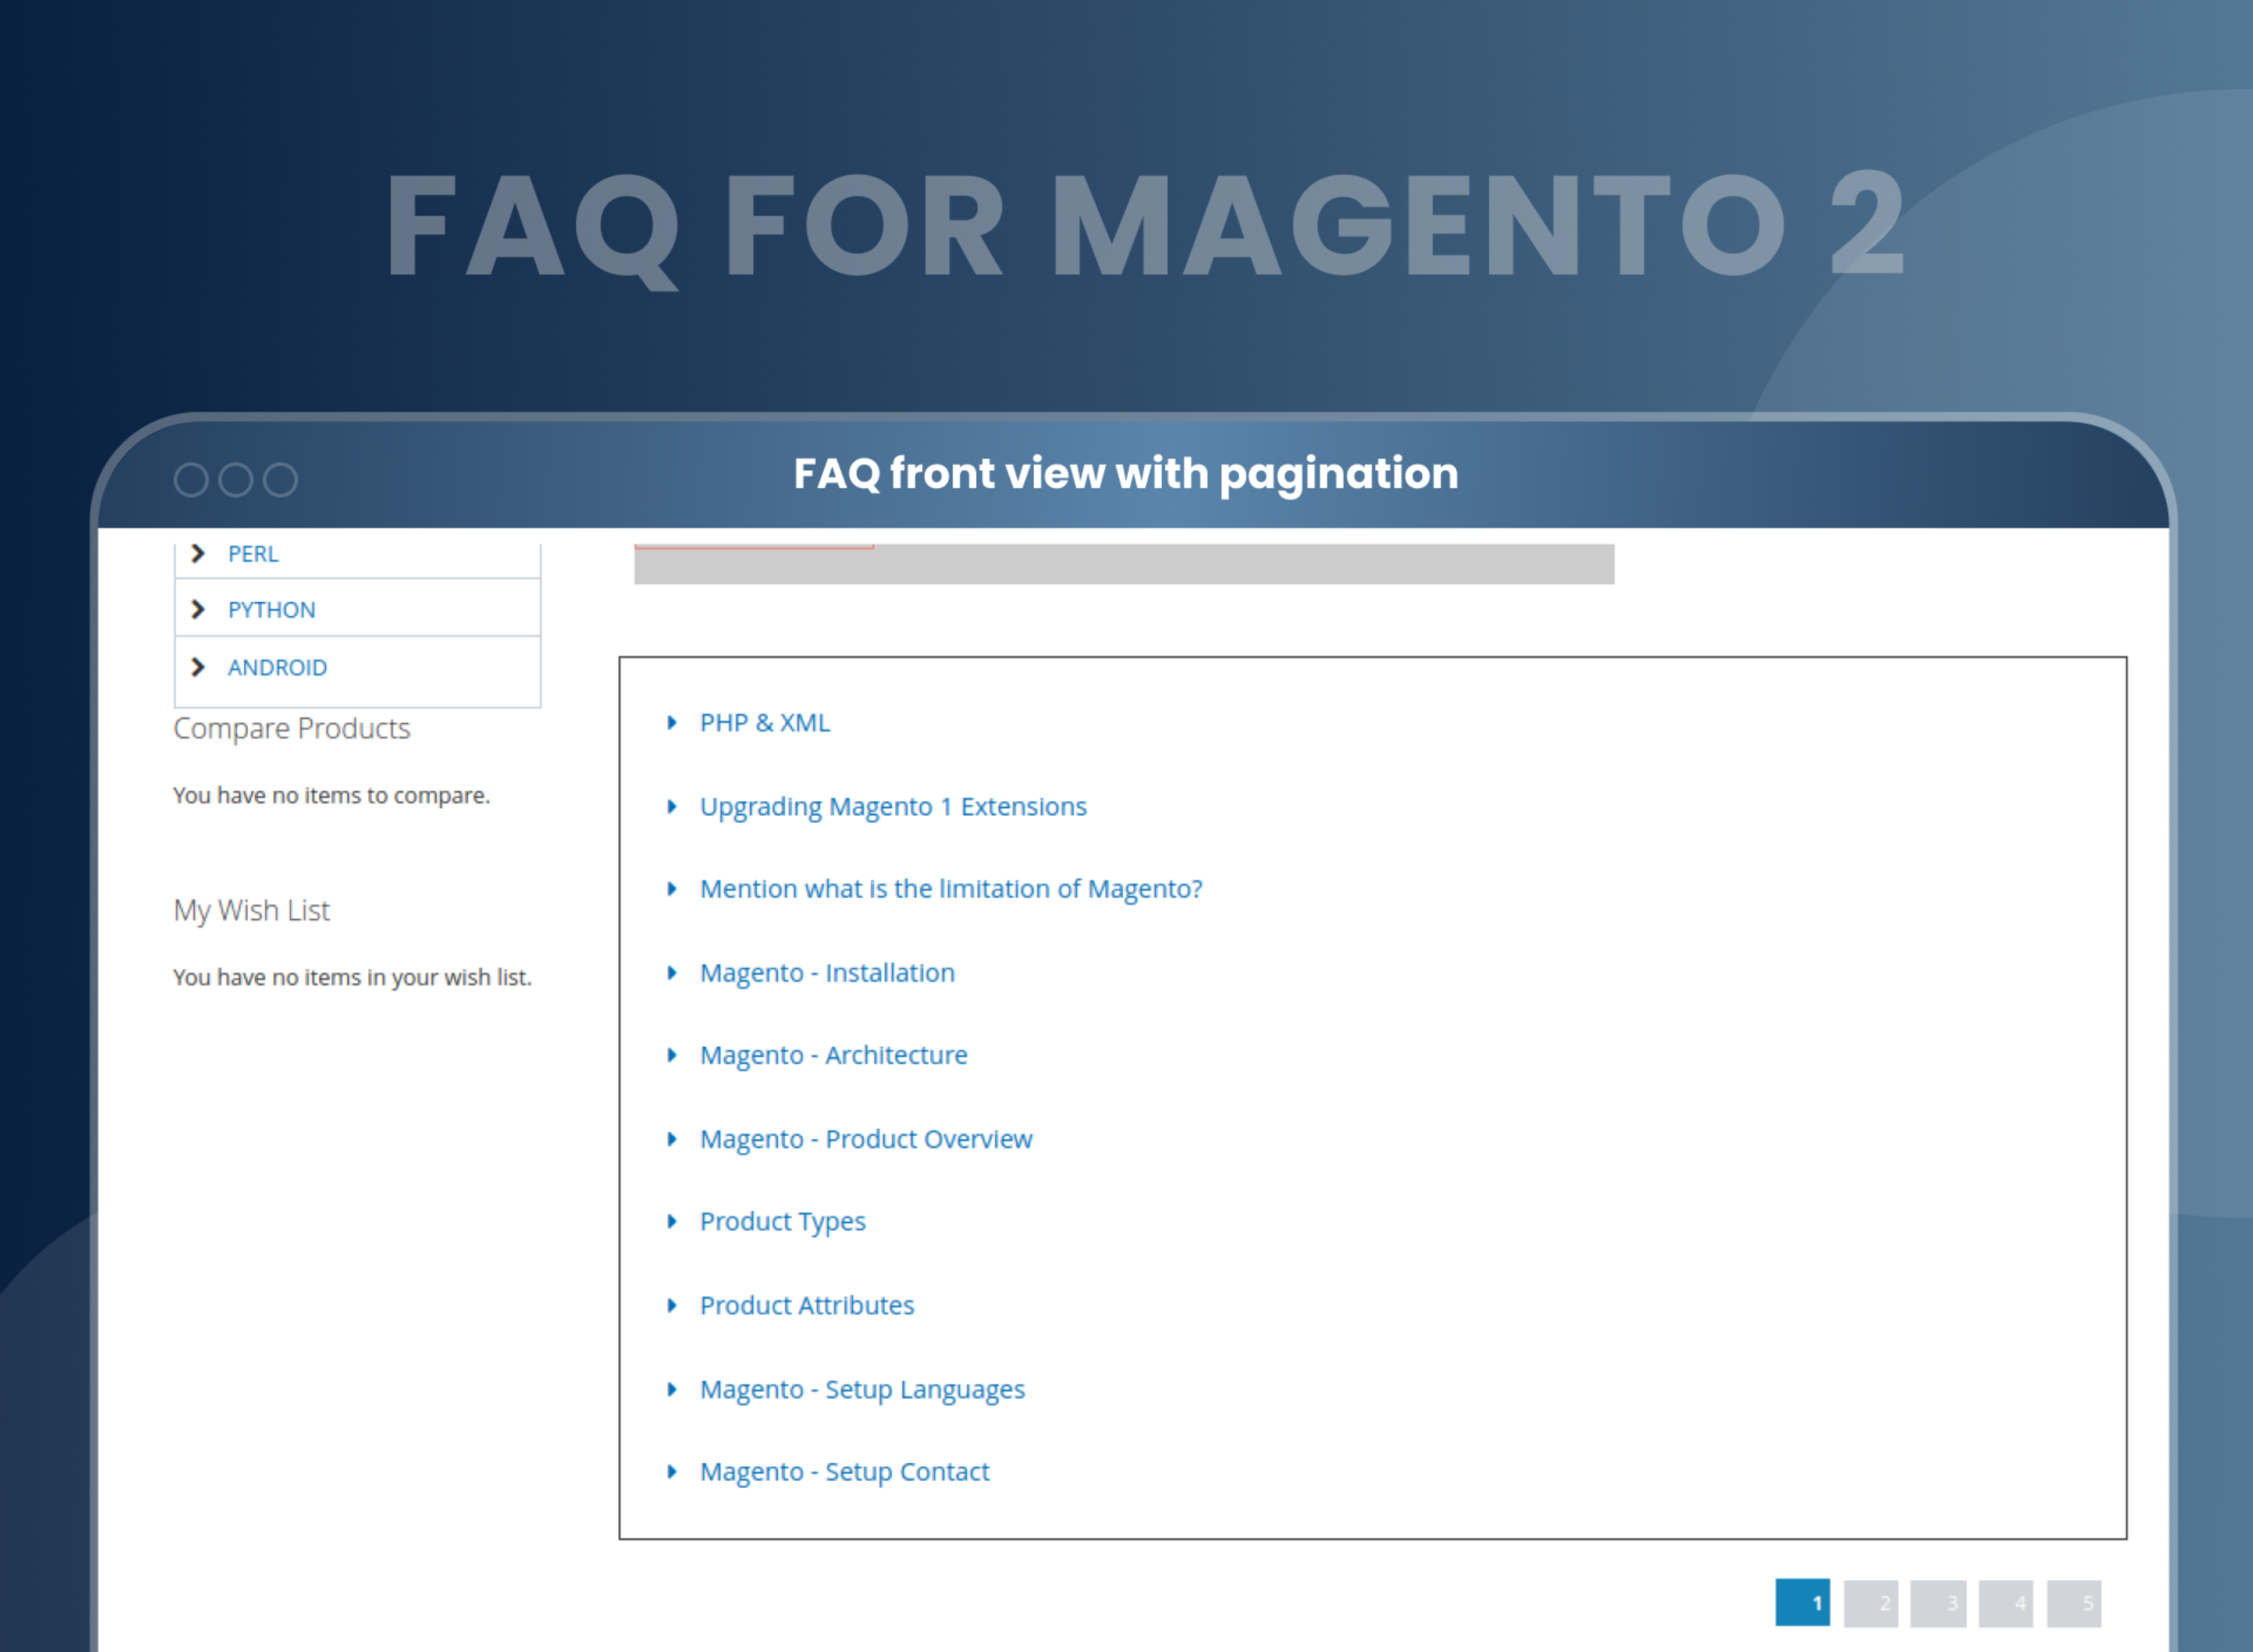 FAQ front view with pagination